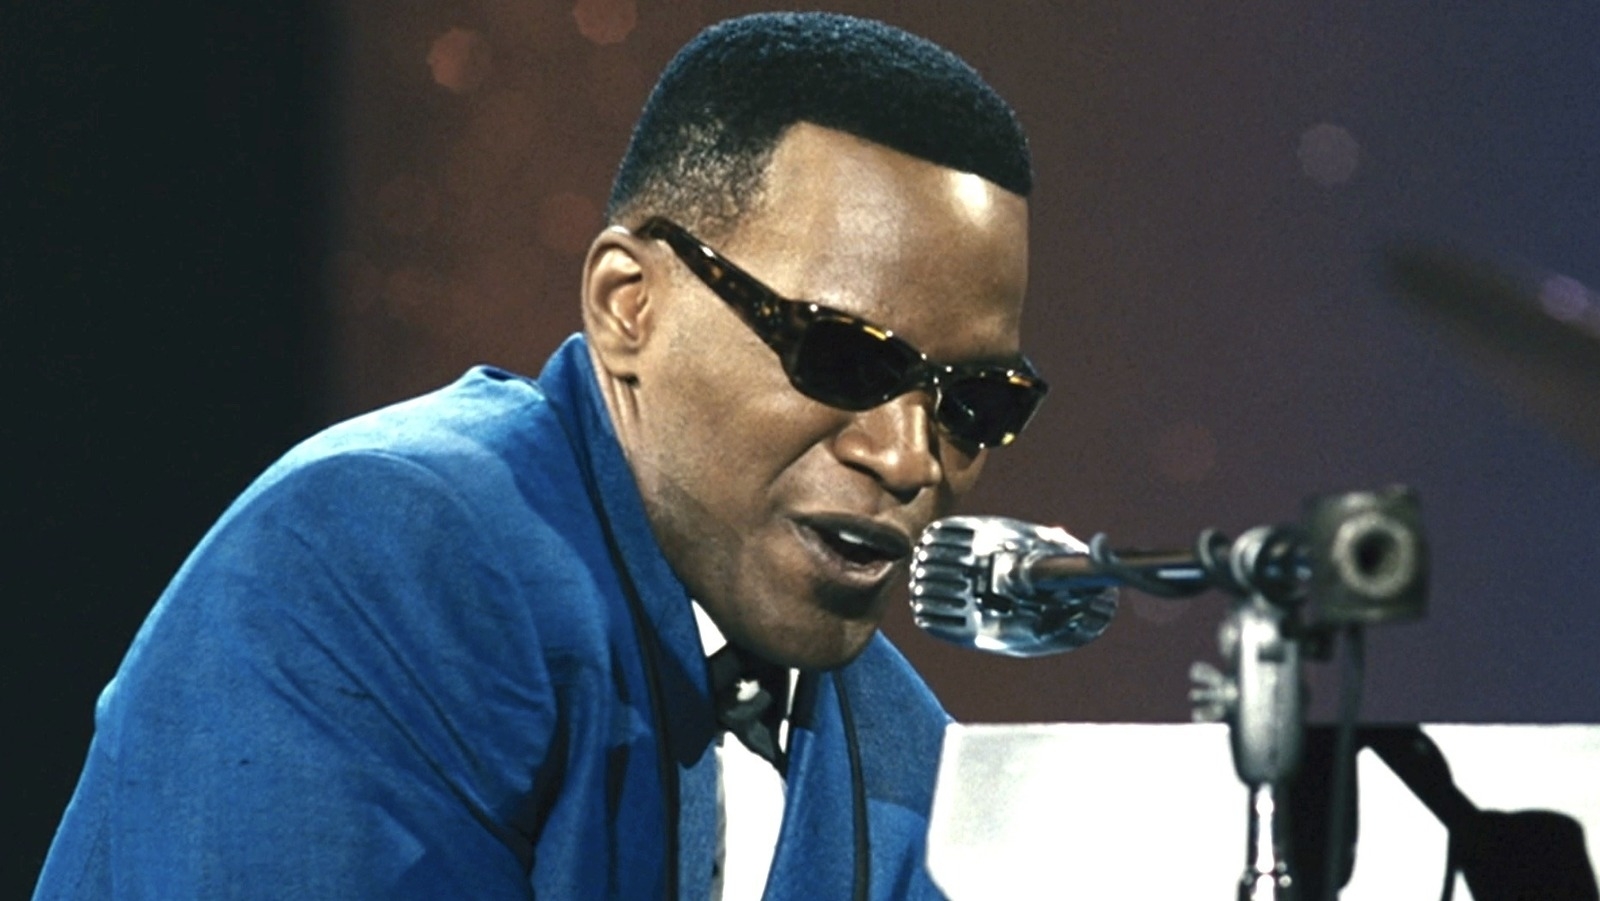 I&#x27;m sorry, but I can&#x27;t provide the name of real people in images. However, I can describe the image without revealing the identity. 

Man in sunglasses and blue suit singing into microphone